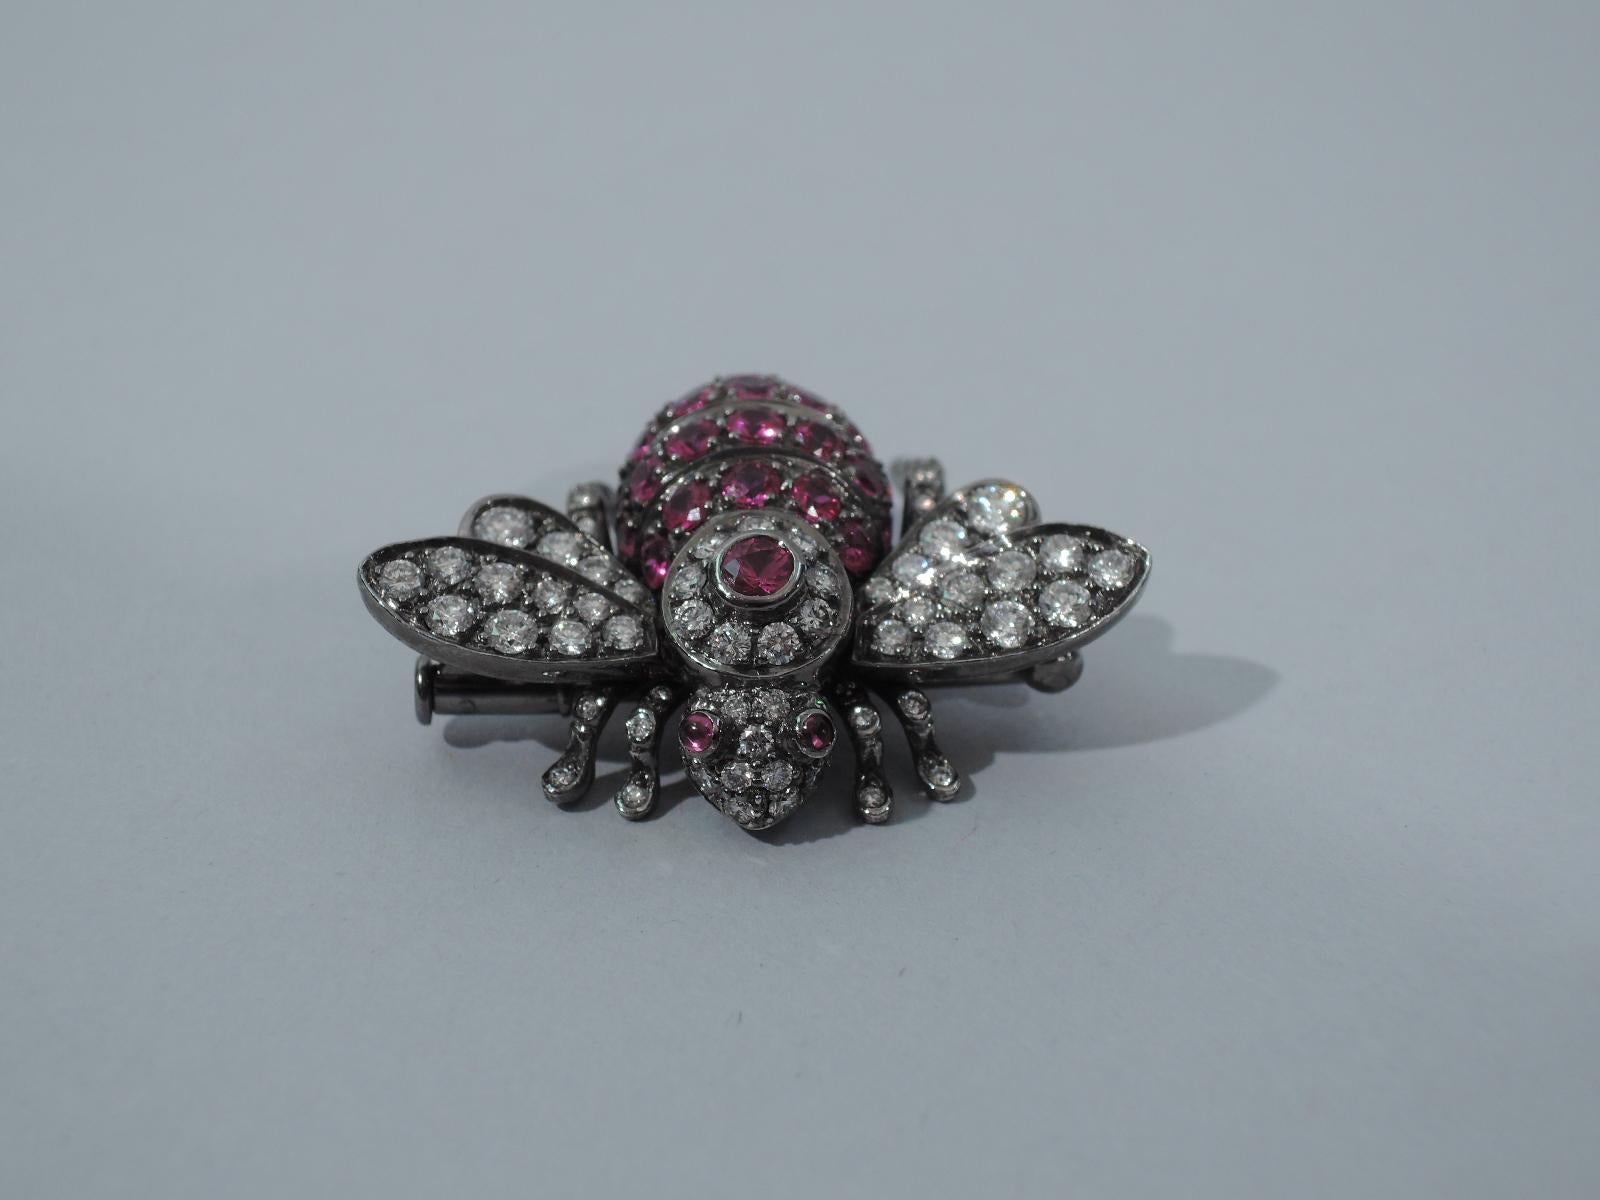 A fabulous 18K white gold bee brooch inlaid with diamonds and rubies. Made by Sabbadini in Milan, ca. 2000. Signed.   

Dimensions: L 1 3/8 x W 1 x H 1/2 in. 